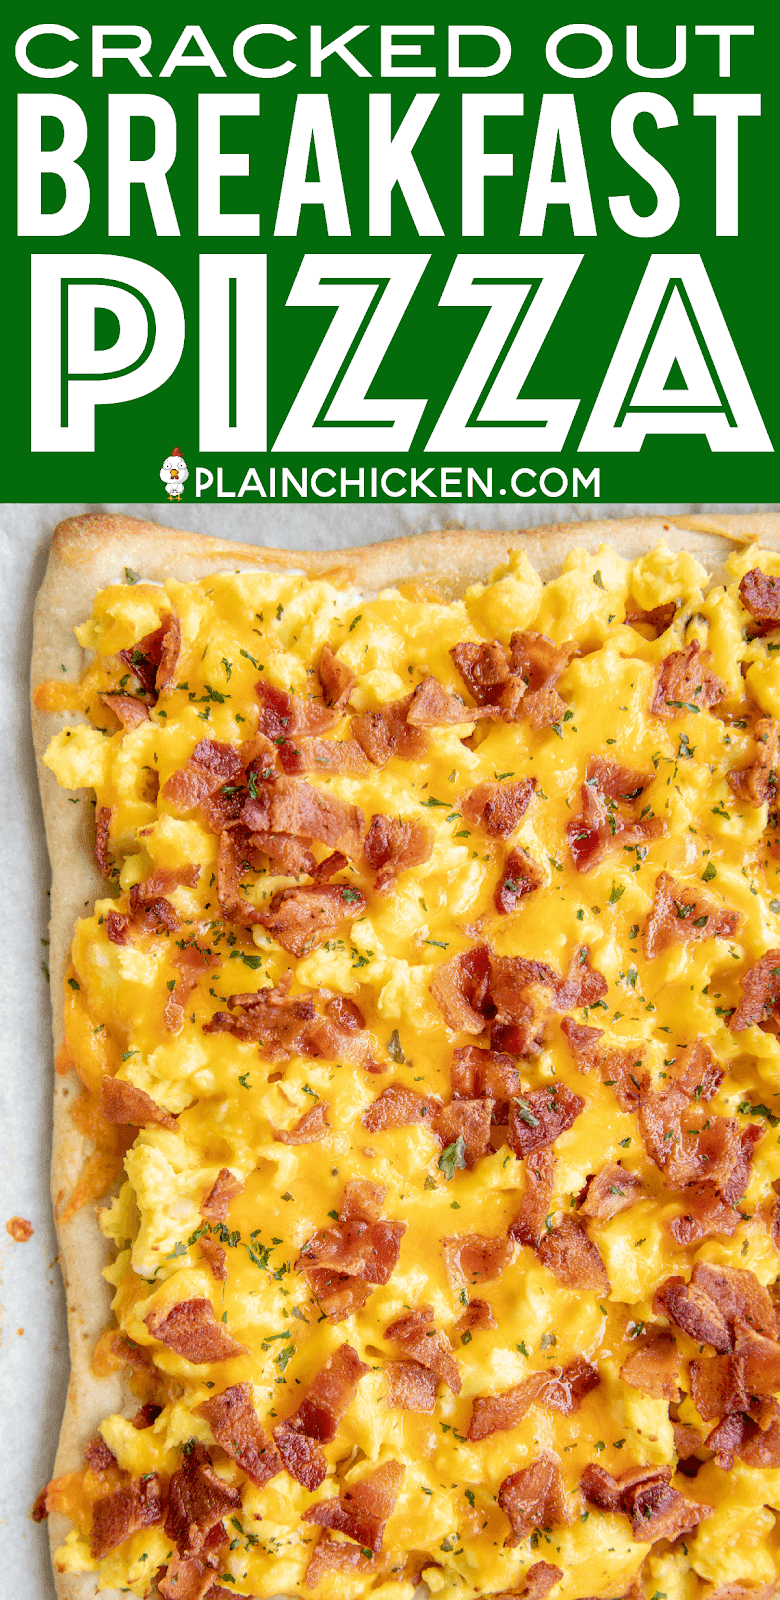 Cracked Out Breakfast Pizza - loaded with cheddar, bacon and Ranch! SO GOOD!!! Easy enough for a weekday breakfast. Refrigerated pizza crust topped with ranch dressing, scrambled eggs, bacon and cheddar cheese. We love this for breakfast, lunch and dinner. This is the most requested breakfast in our house. There are never any leftovers!! #breakfast #pizza #eggs #bacon #cheese